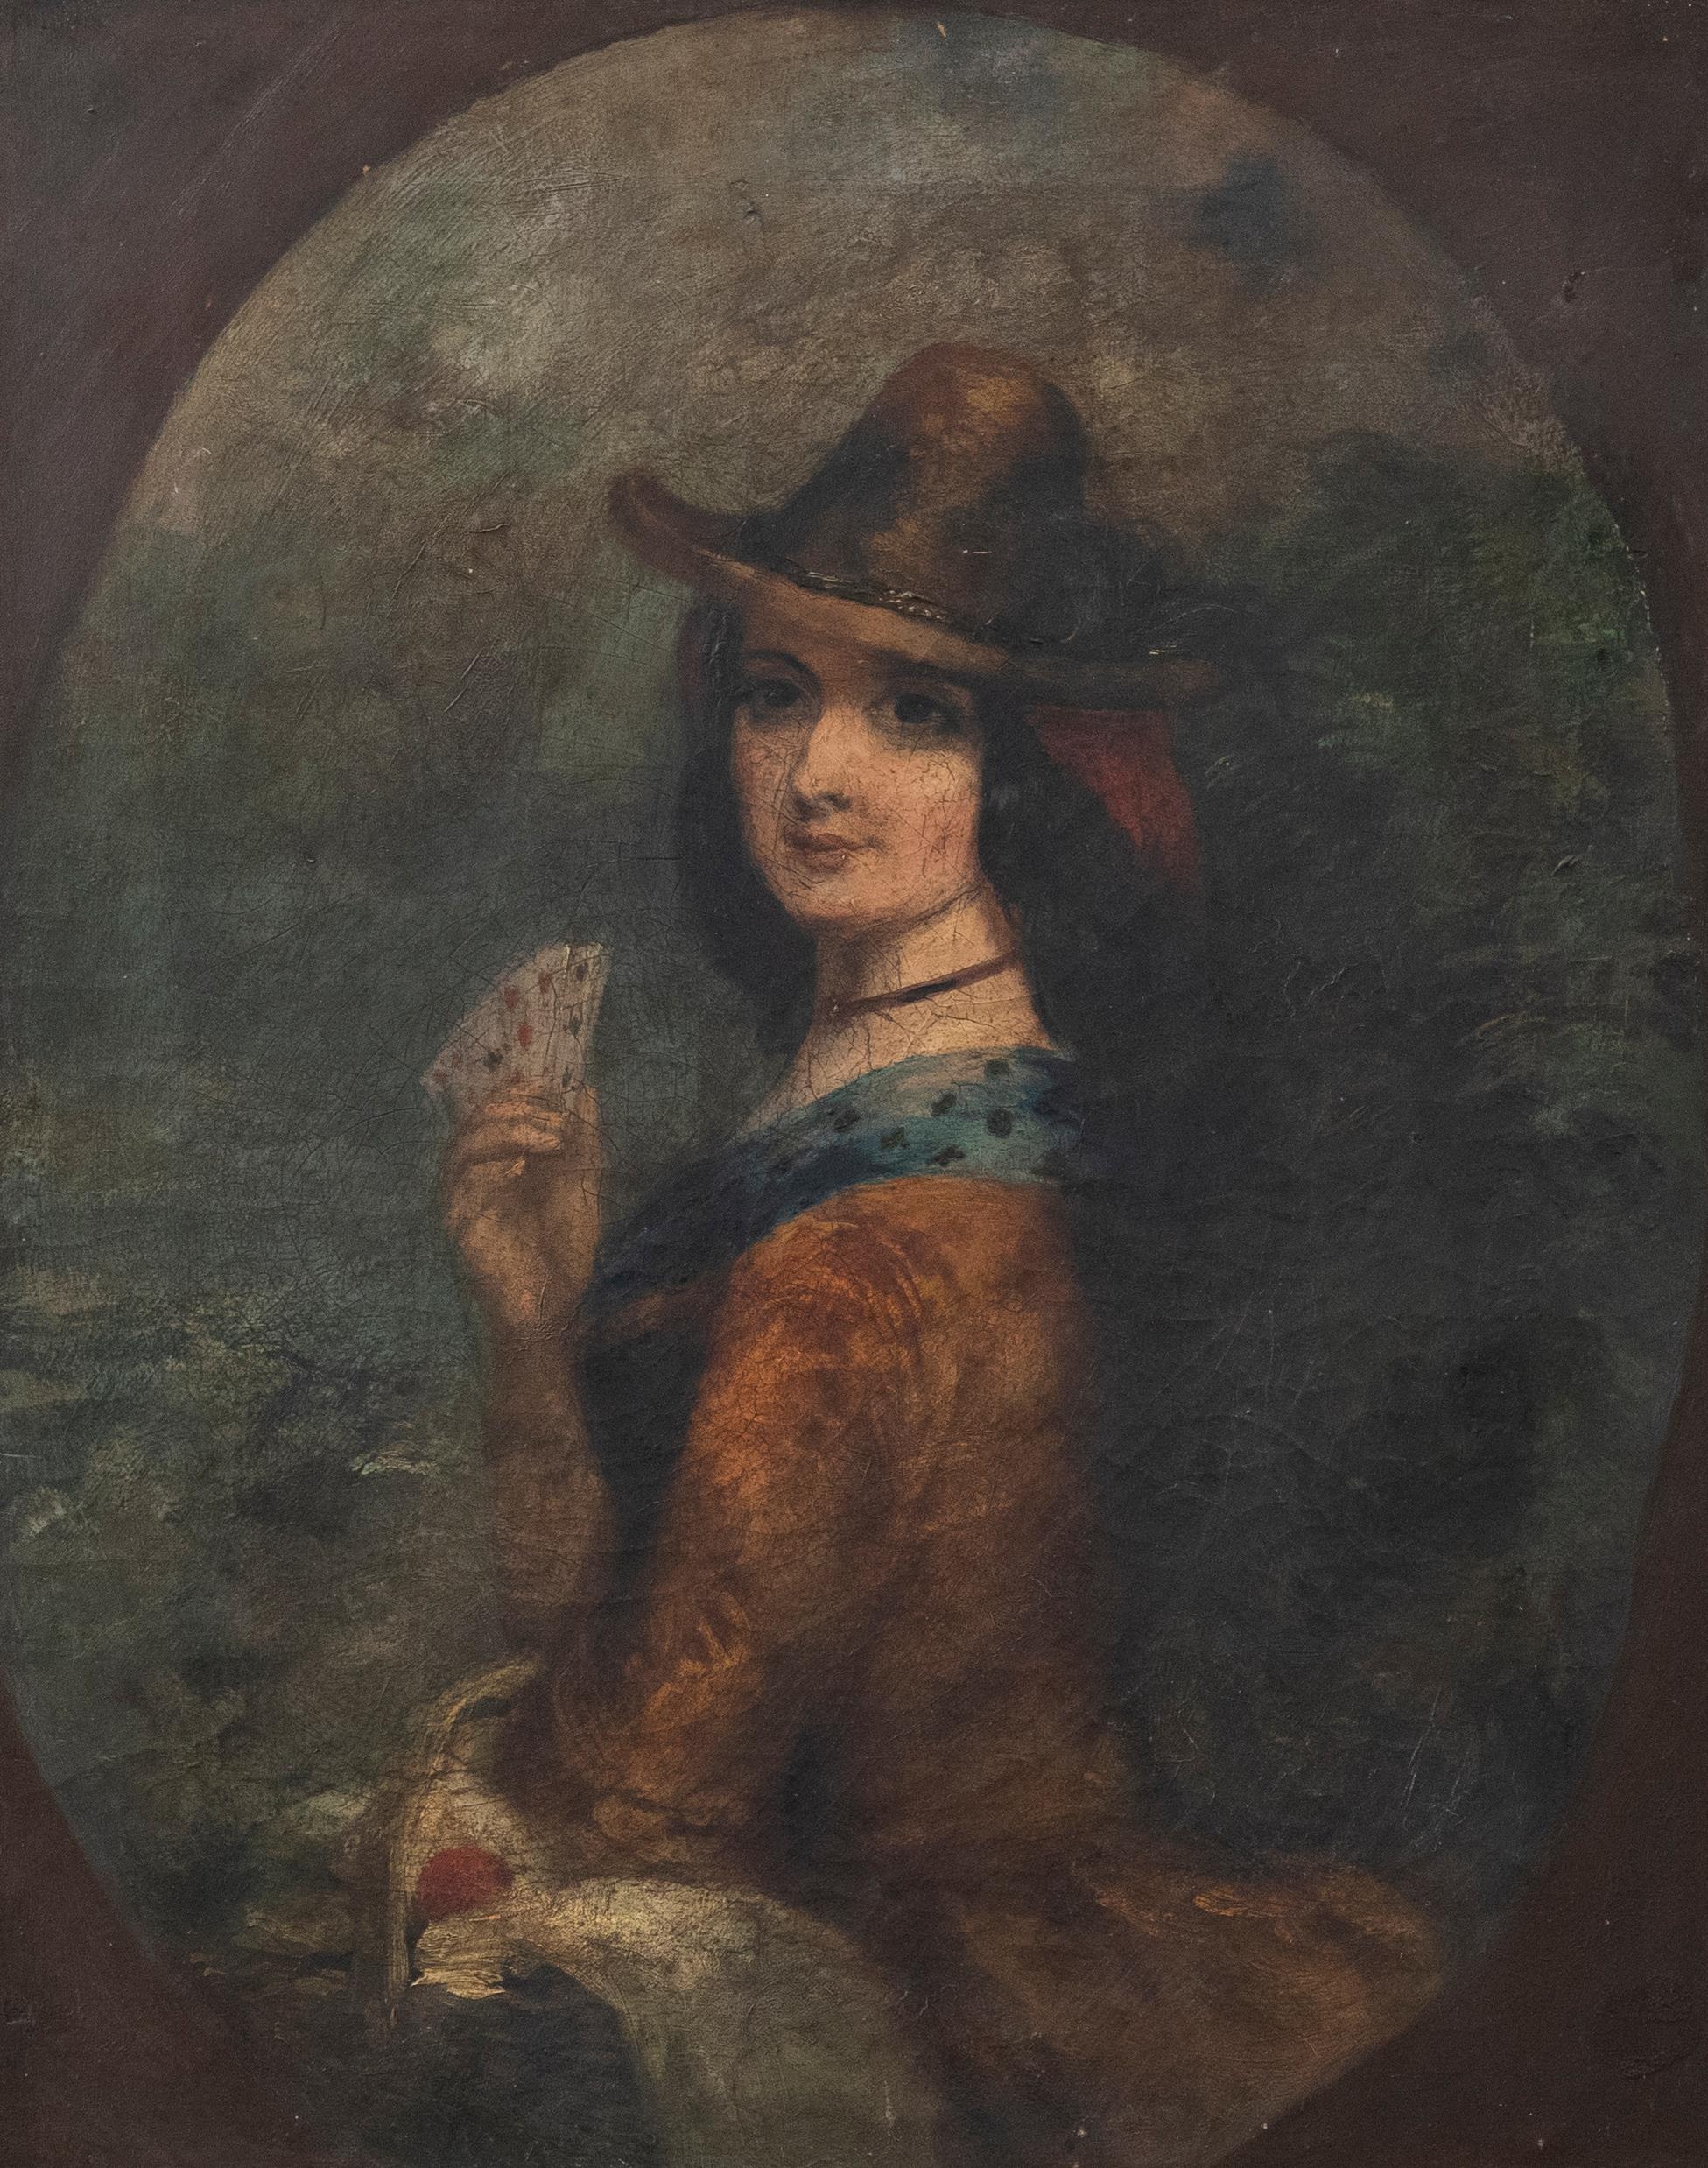 An interesting portrait of a young woman holding a deck of playing cards and a picnic basket. This mysterious figure is well dressed and wears her hair down, which is unusual for the period. Her delicate, doll-like features are reminiscent of the